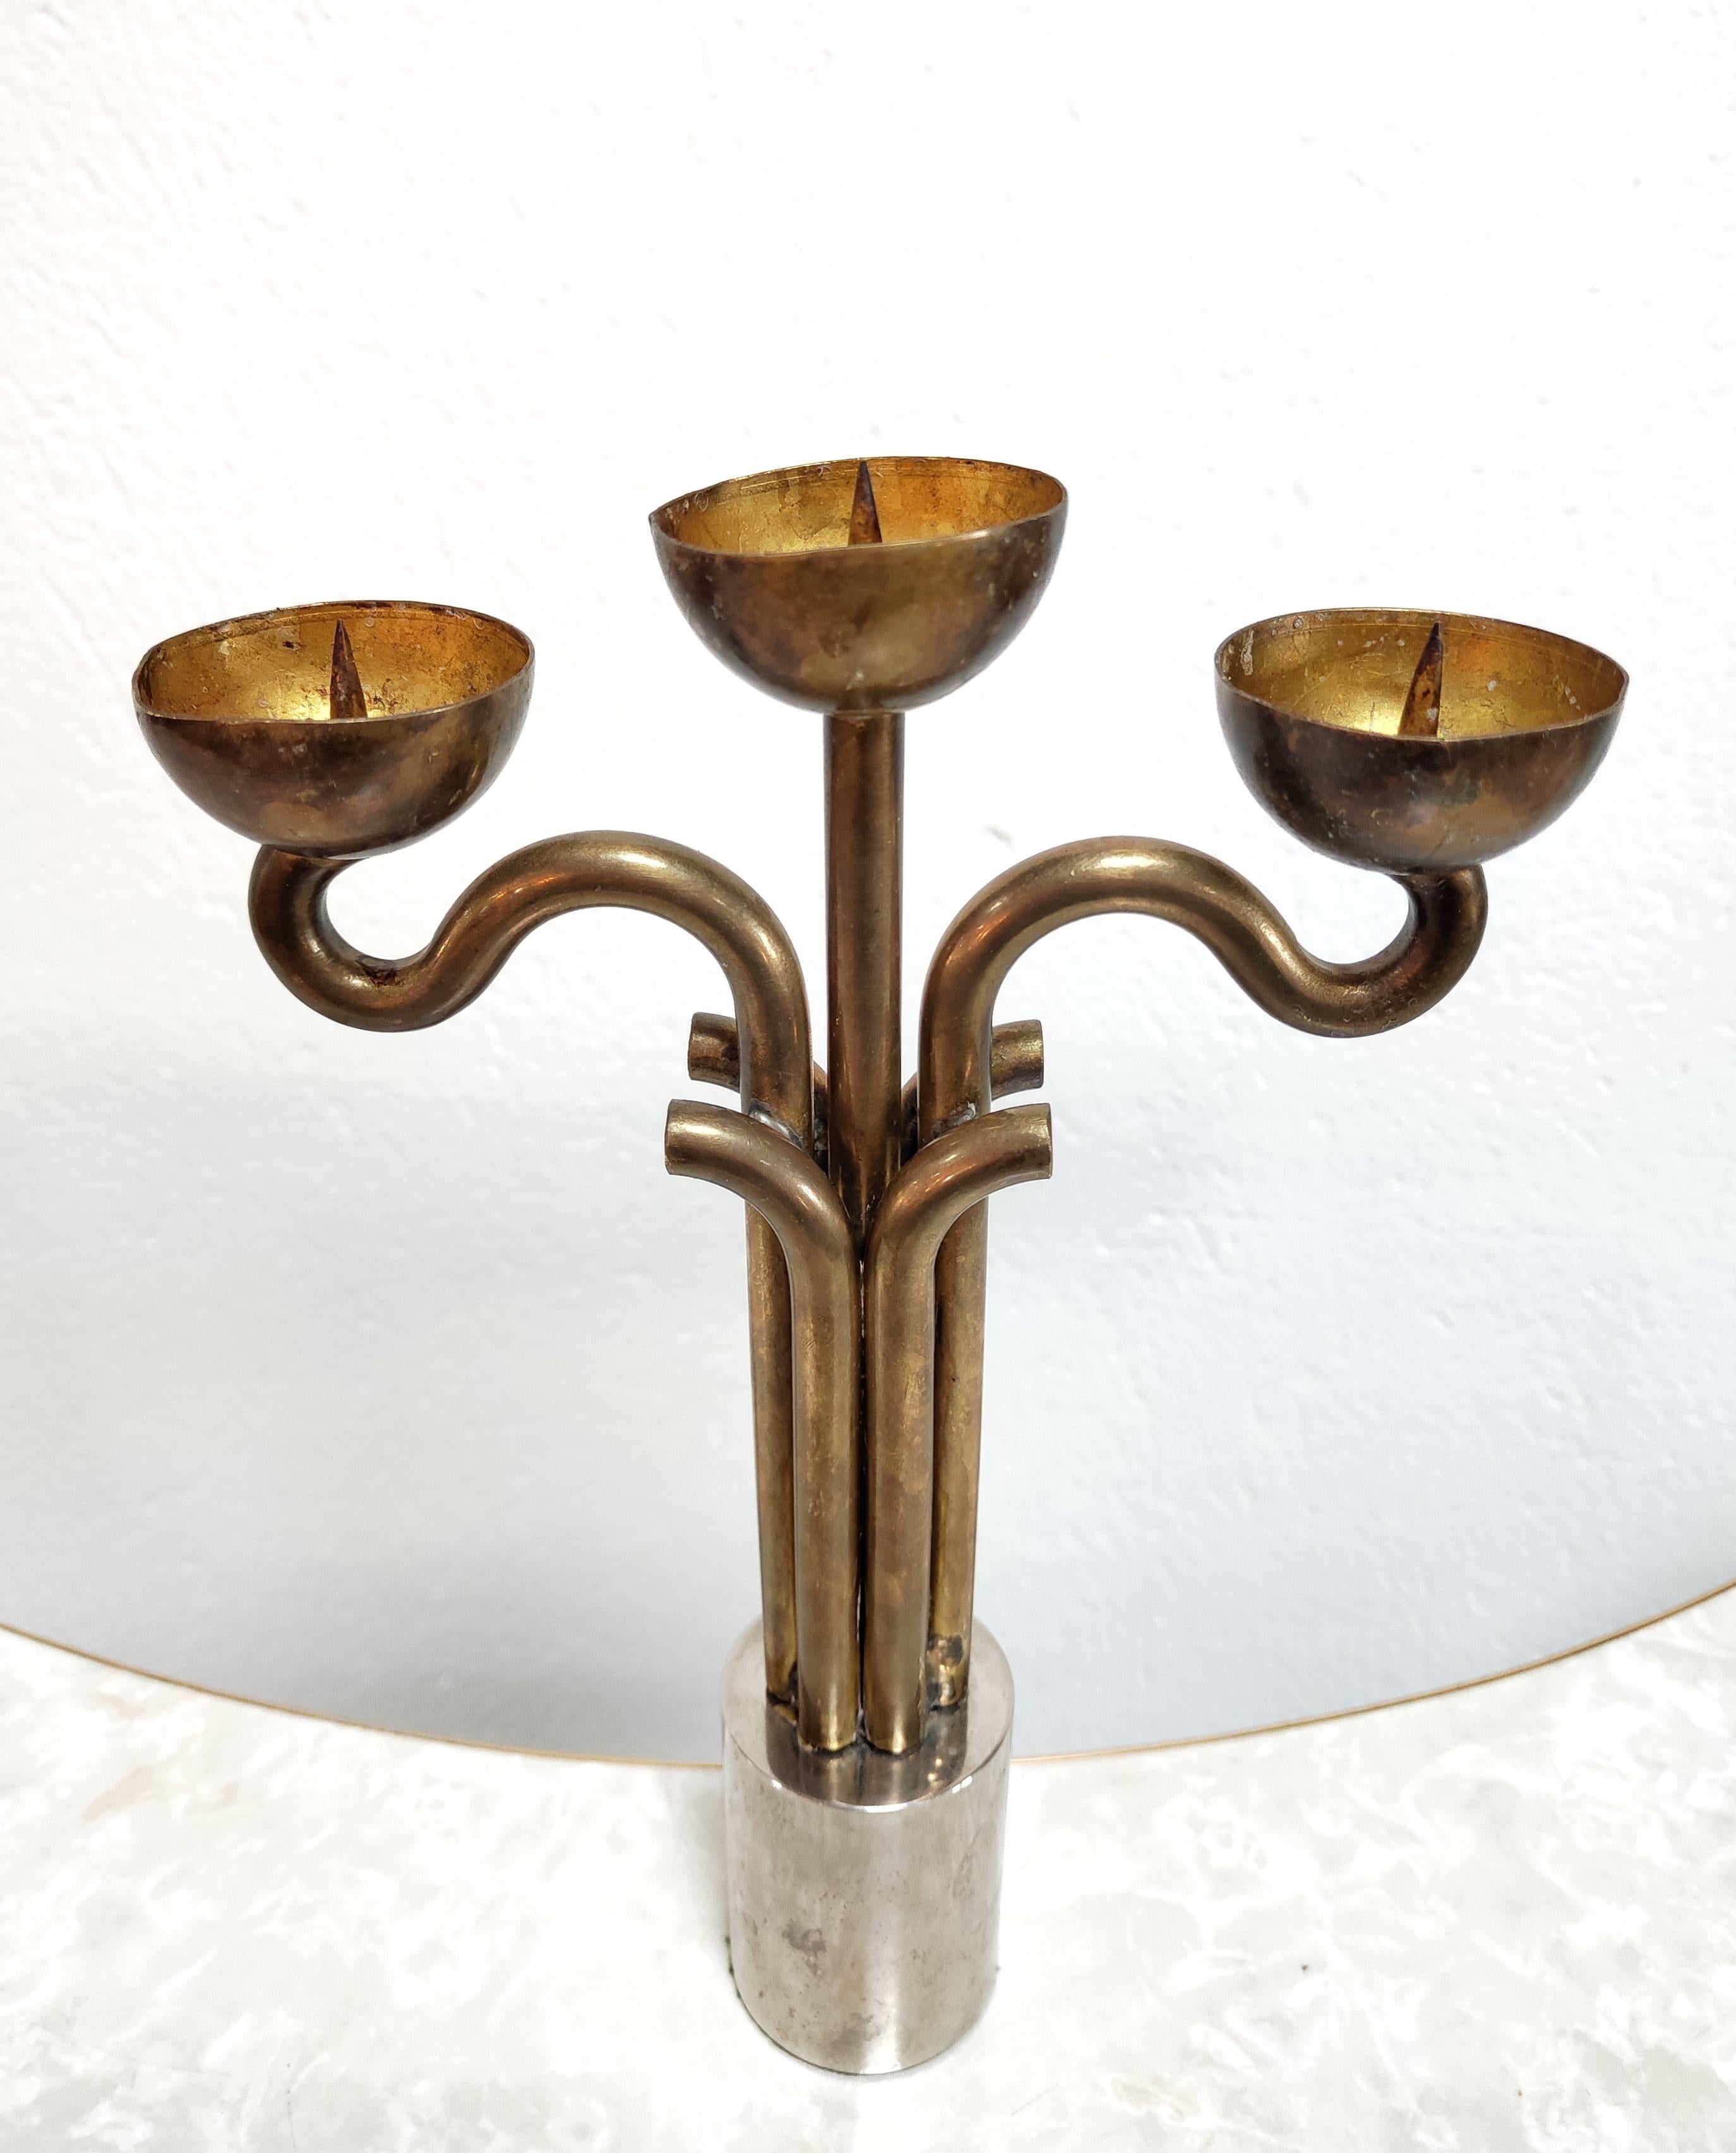 Brutalist Candlestick Holder Done in Brass and Nickel, Italy, 1970s For Sale 3